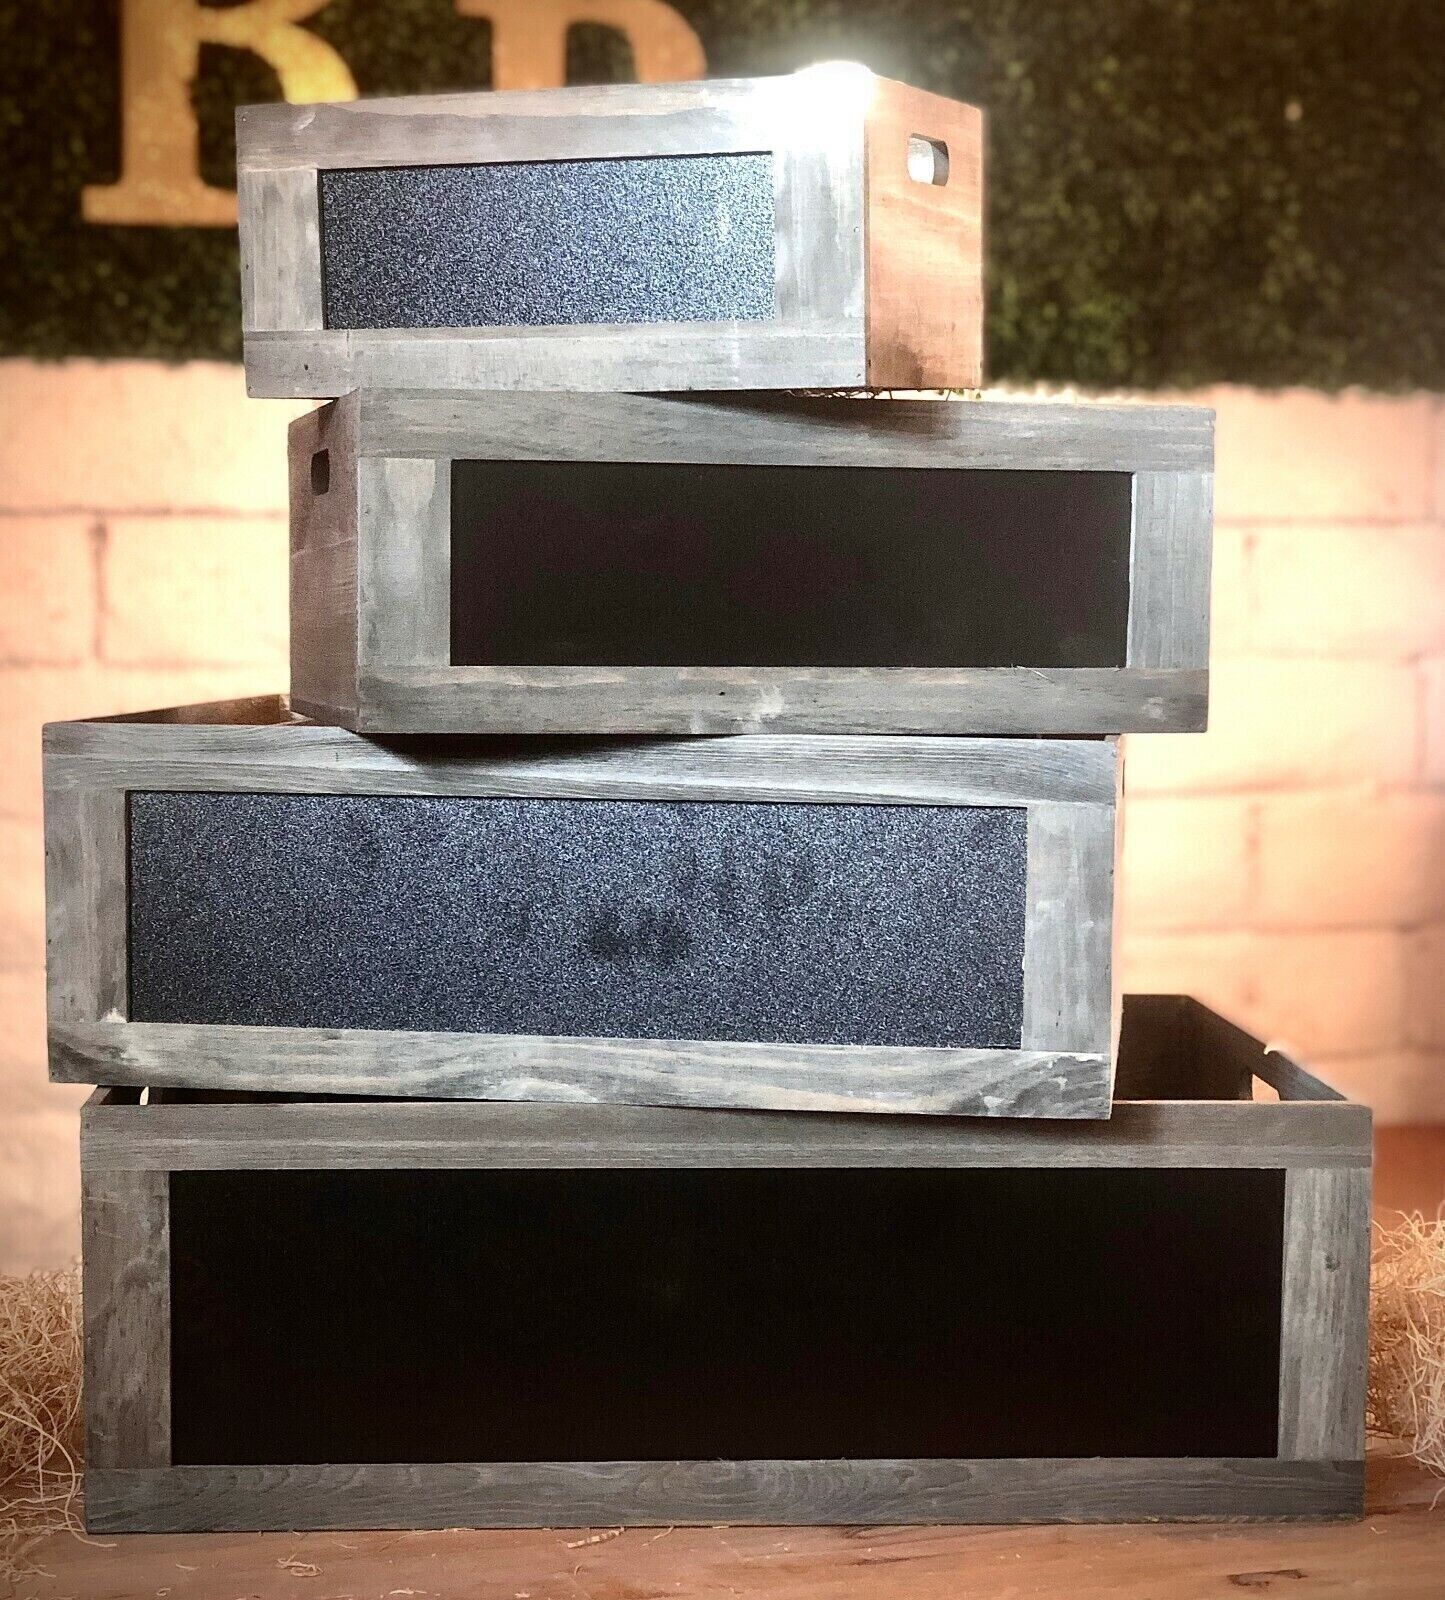 Set of 4 wooden rustic LARGE Gift Crates with Handles & Chalkboard 